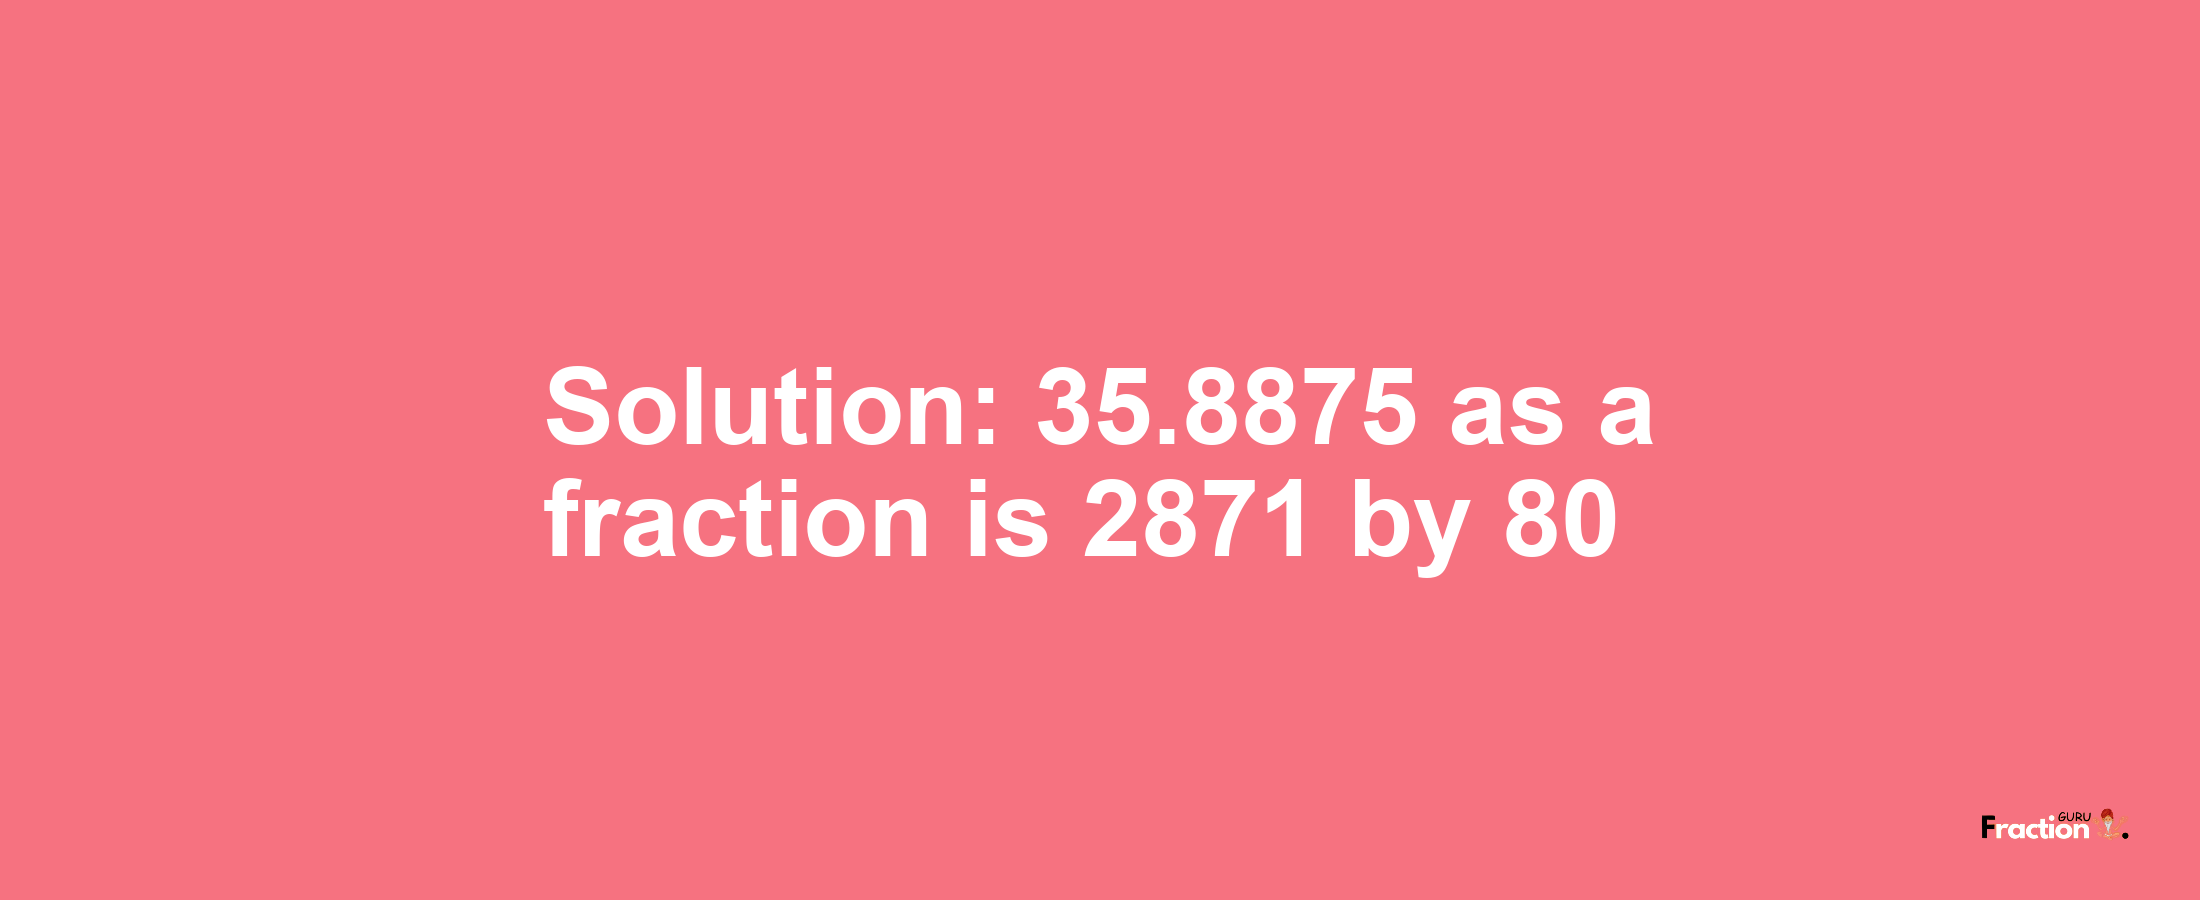 Solution:35.8875 as a fraction is 2871/80